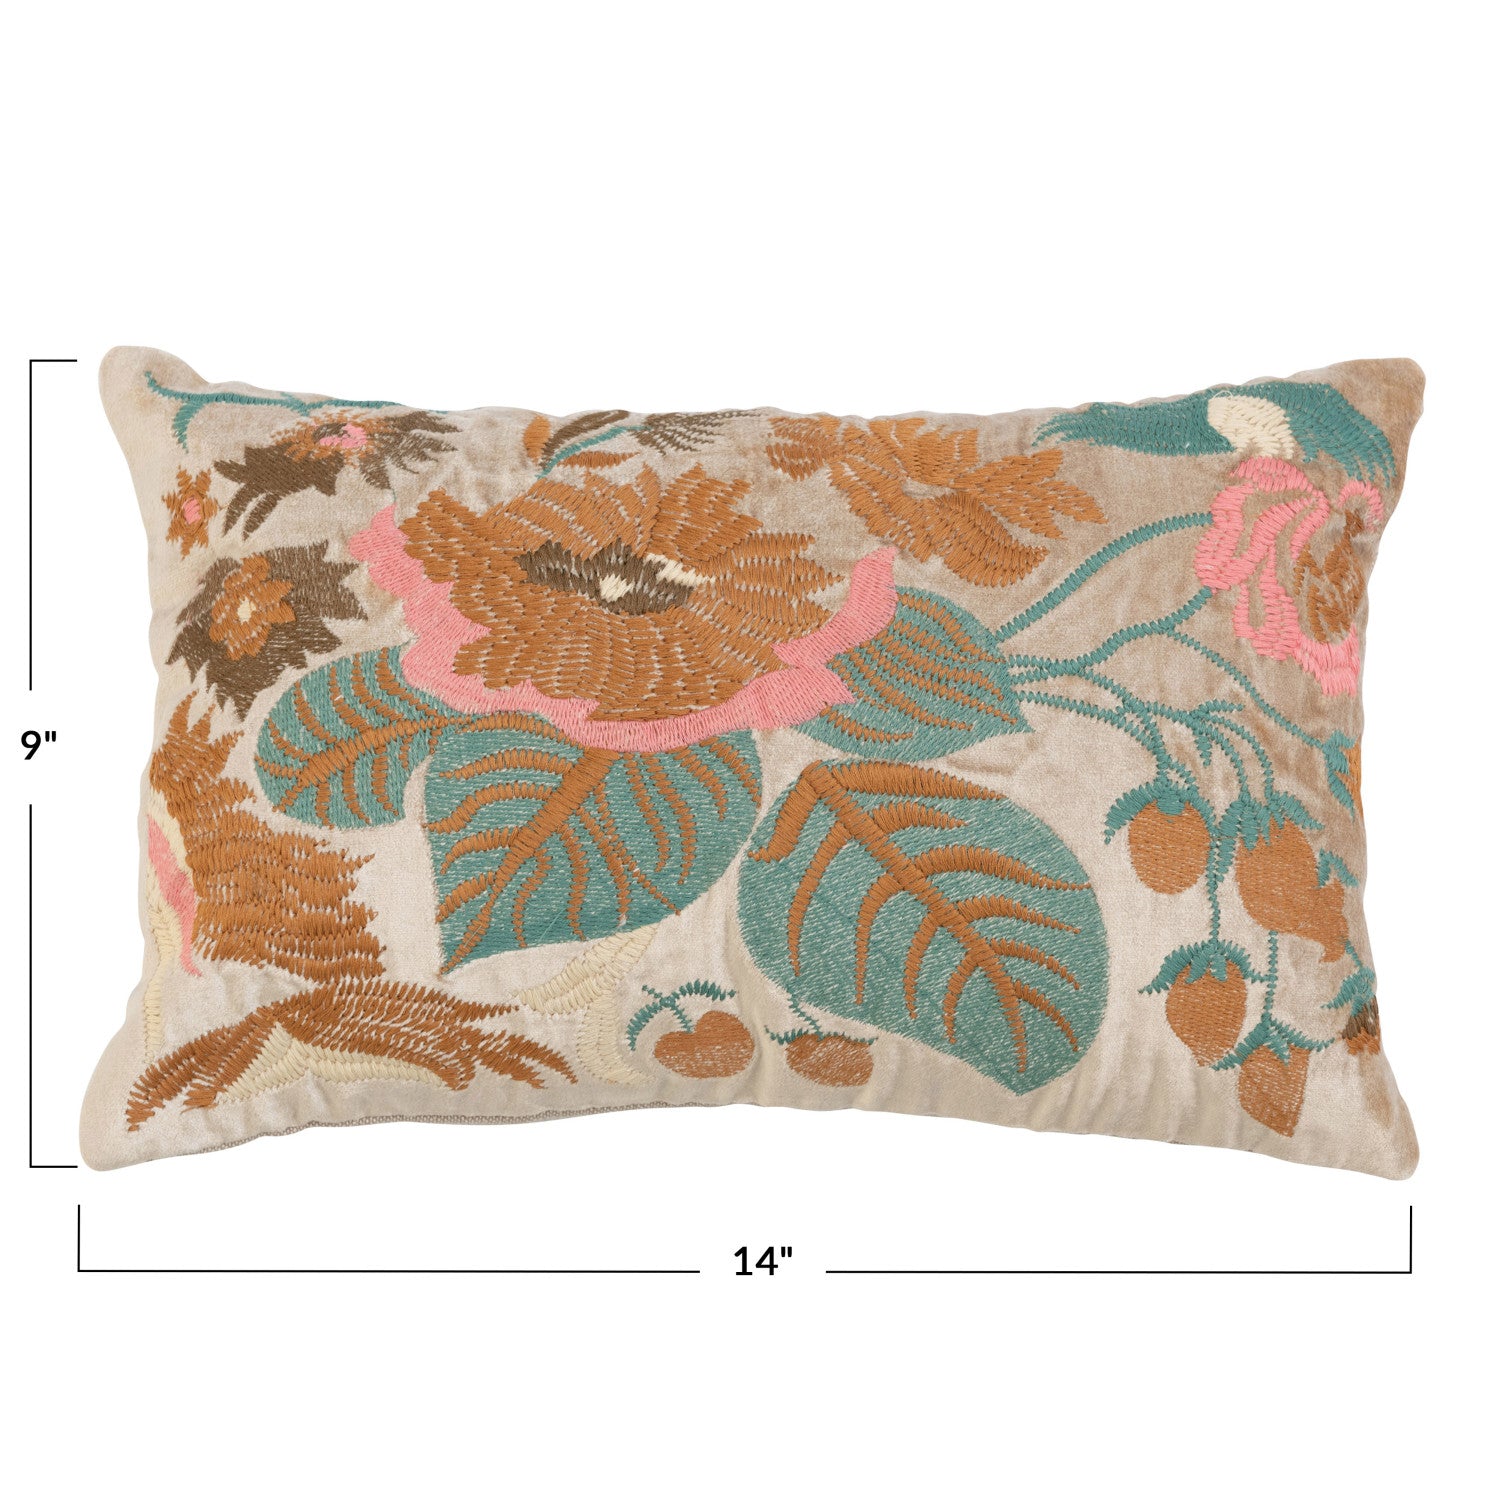 Cotton and Velvet Lumbar Pillow with Floral Embroidery measures 14 inches long by 9 inches high.